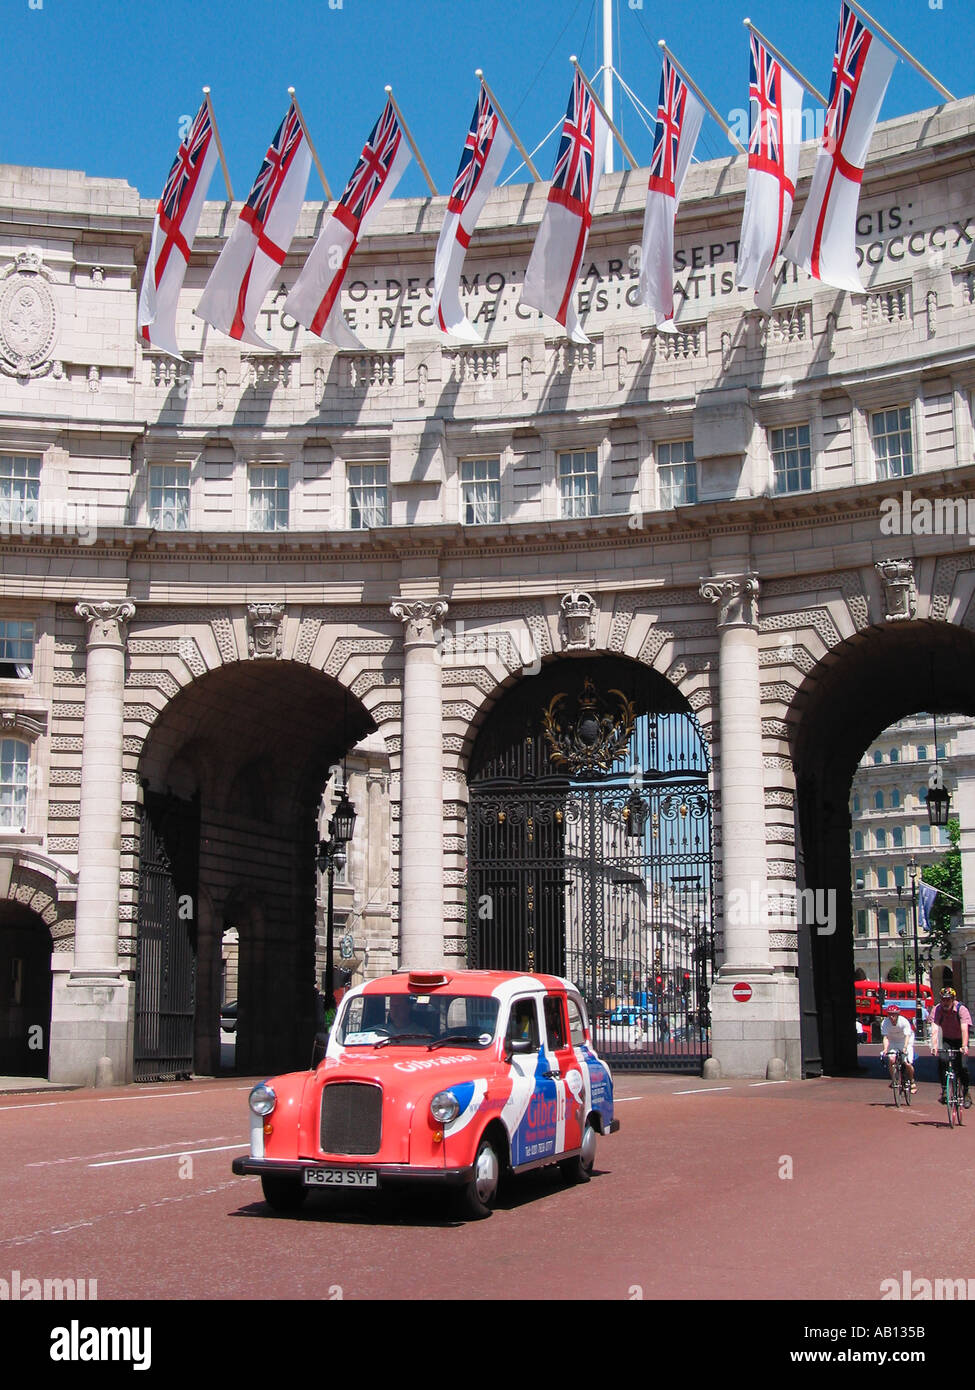 London Taxi coloured in the Union Jack flag with white ensign flags flying above on the Admiralty Arch, The Mall, London, England, United Kingdom Stock Photo